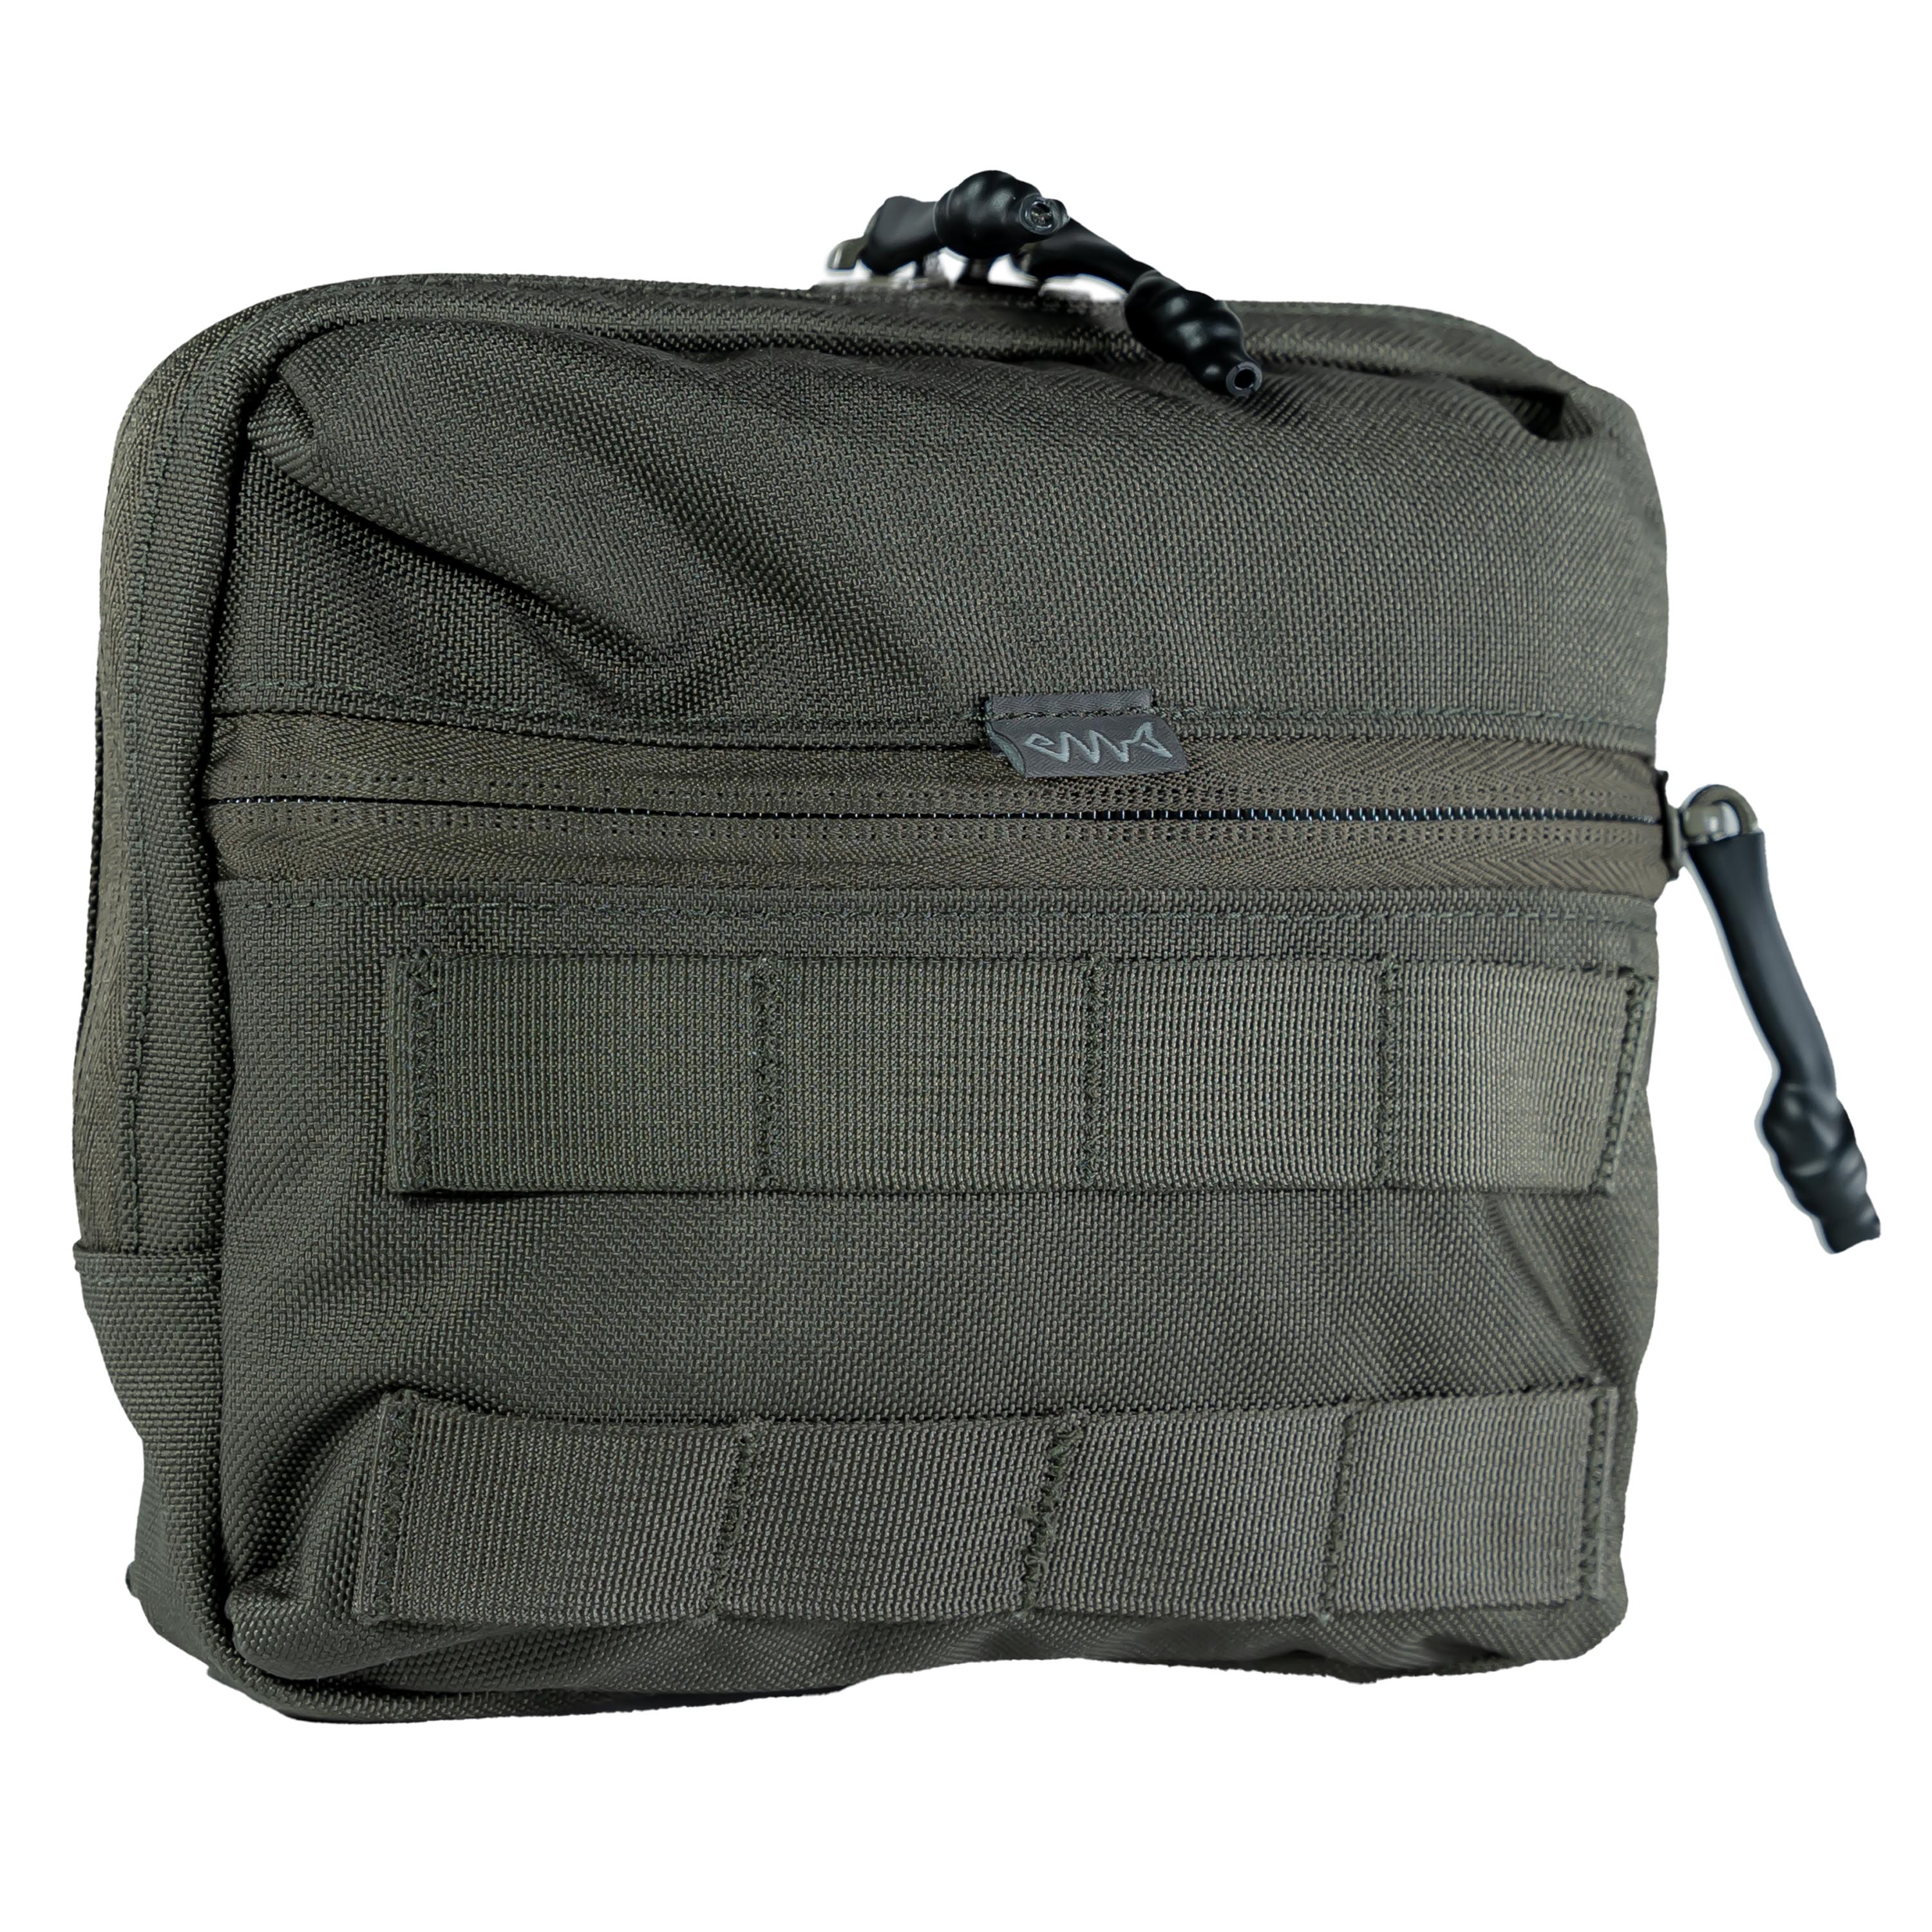 Admin MOLLE Pouch - Pre-order delivery in May 2024